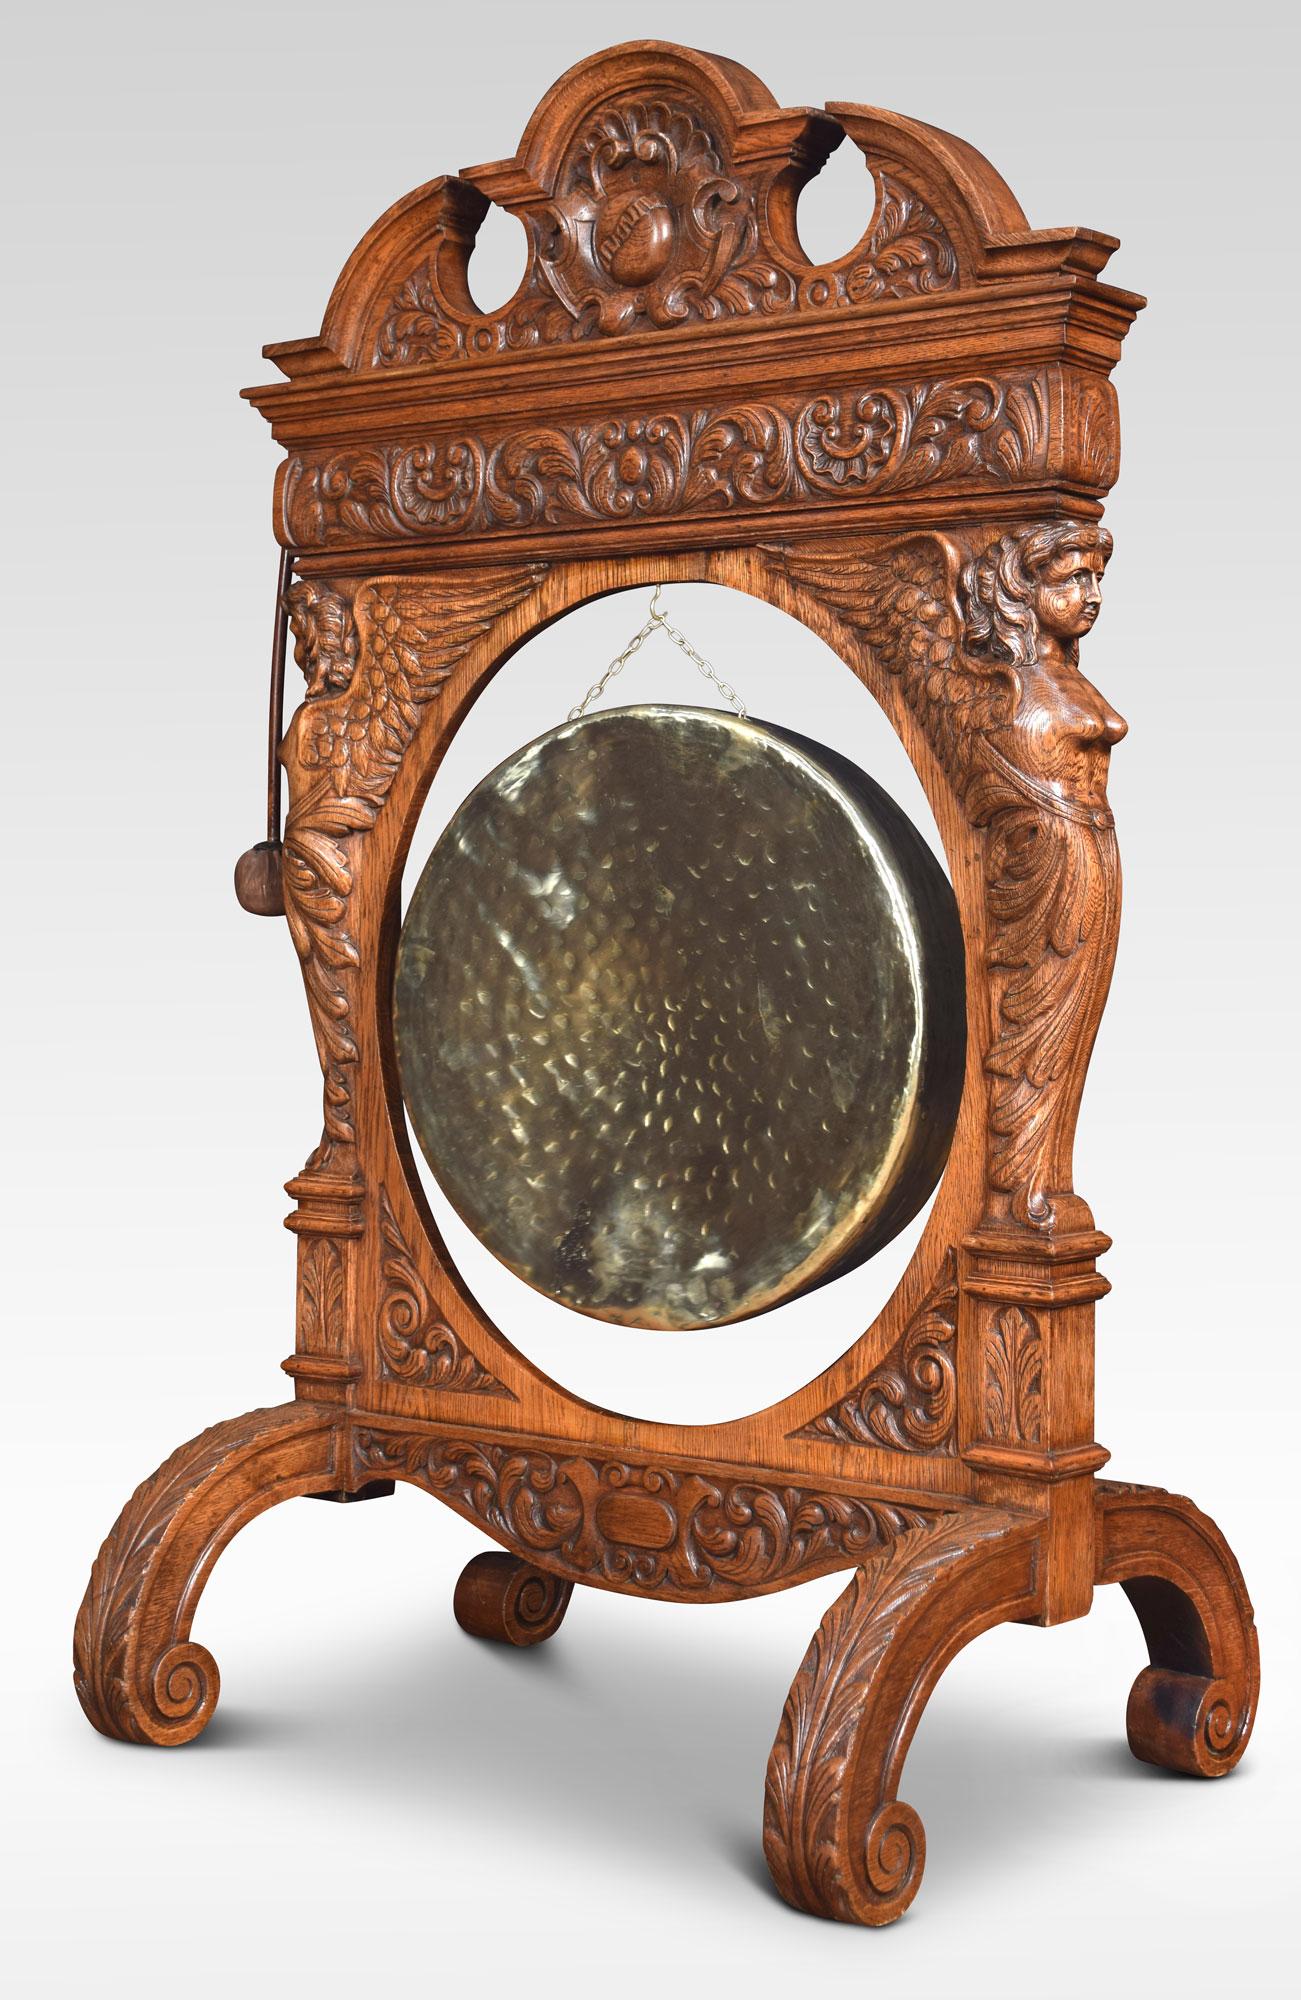 An enormous carved oak dinner gong, the oak frame with swan neck pediment above a leaf carved scroll decorated frame supporting the original brass gong. Flanked by caryatid supports. All raised up on splayed legs.
Dimensions
Height 60